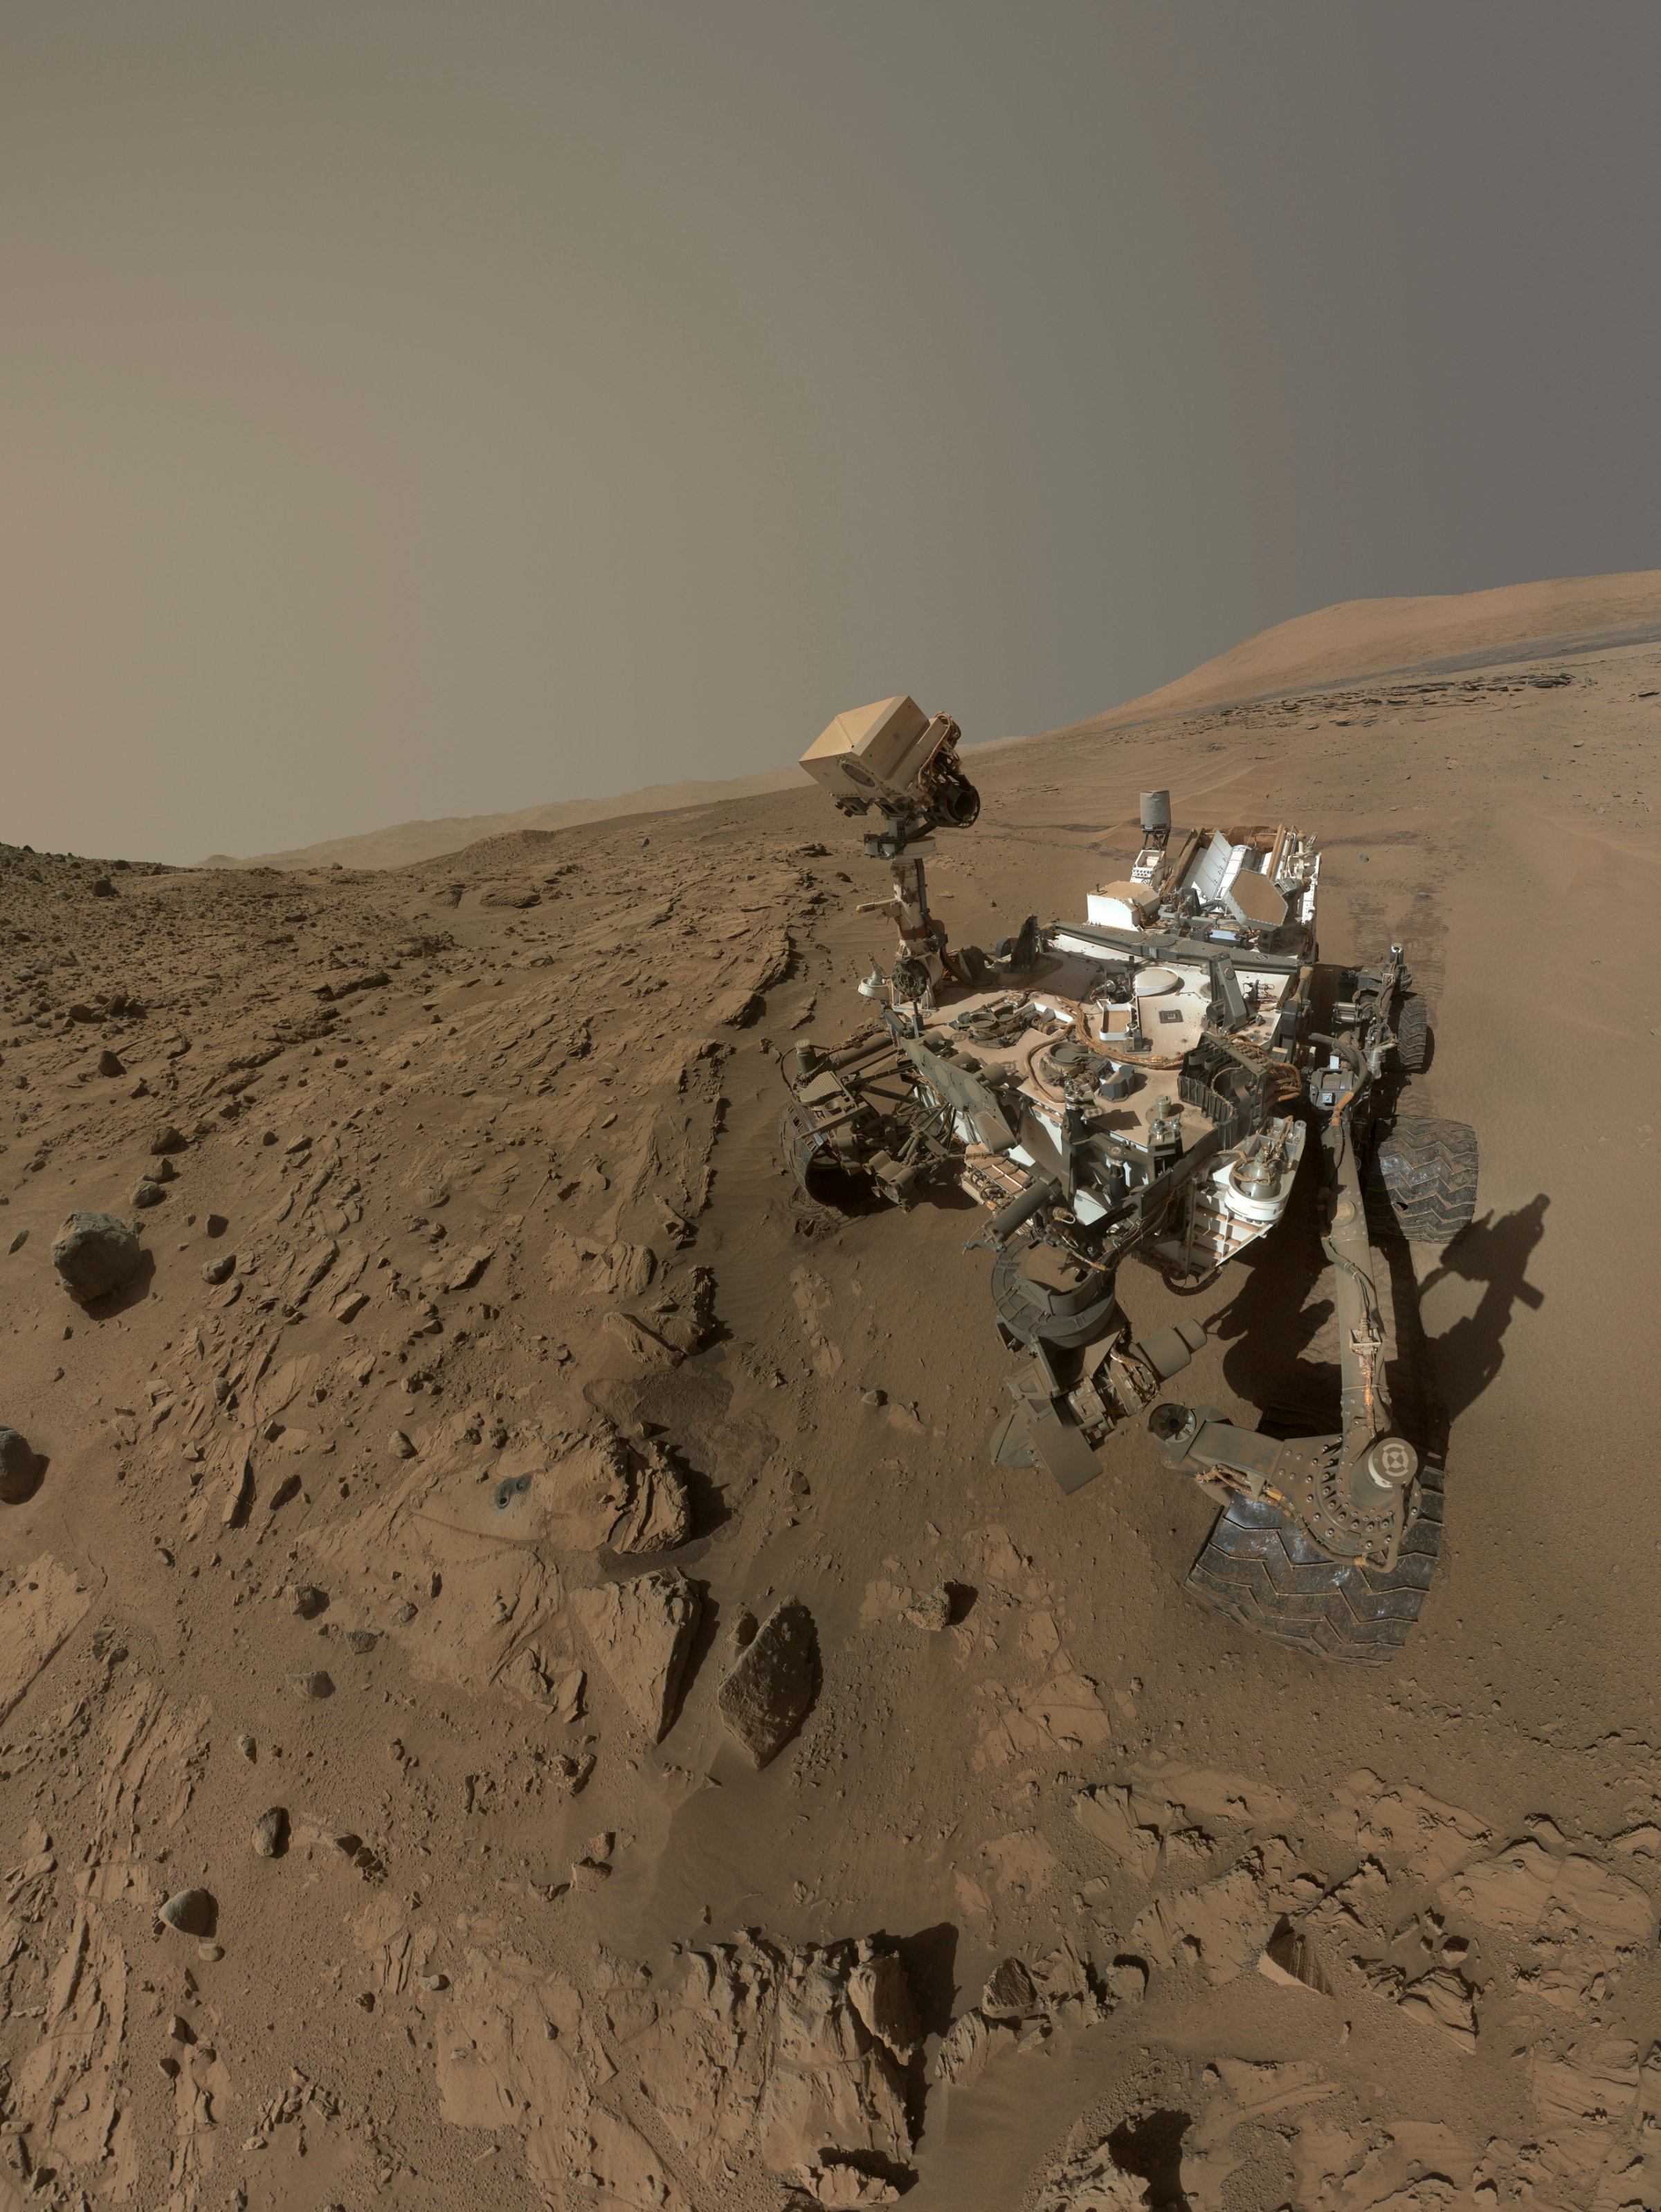 NASA's Mars Curiosity rover is pictured in this self-portrait where the rover drilled into a sandstone target called "Windjana" on Mars in this handout photo. June 2014.